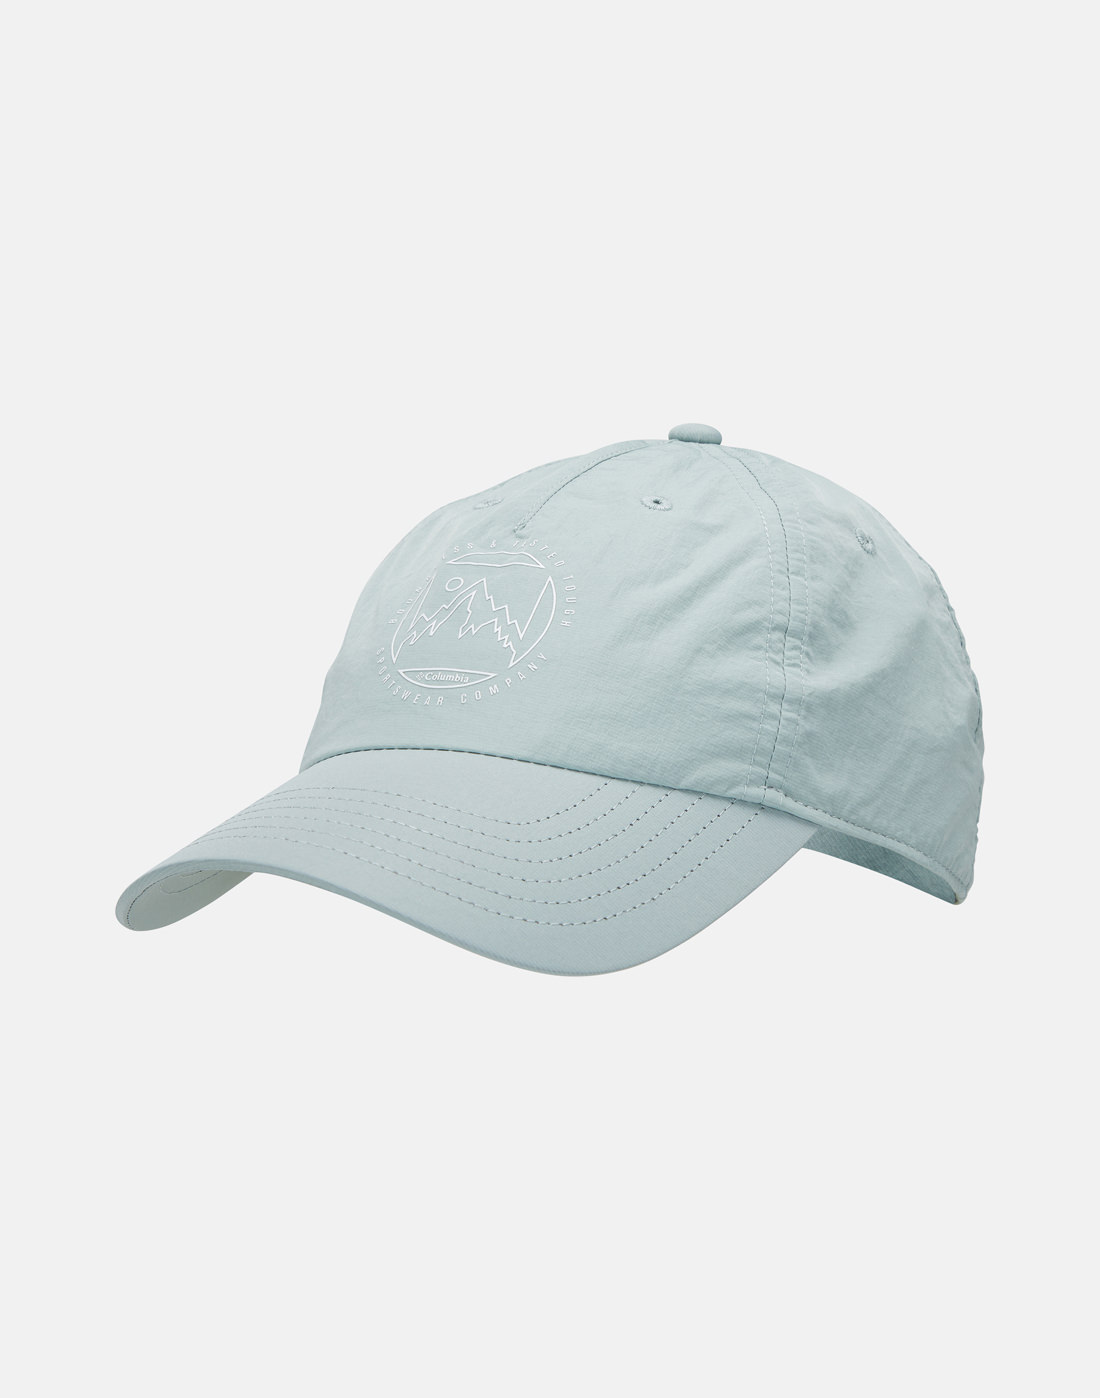 Columbia Spring Canyon Cap - Blue | Life Style Sports IE